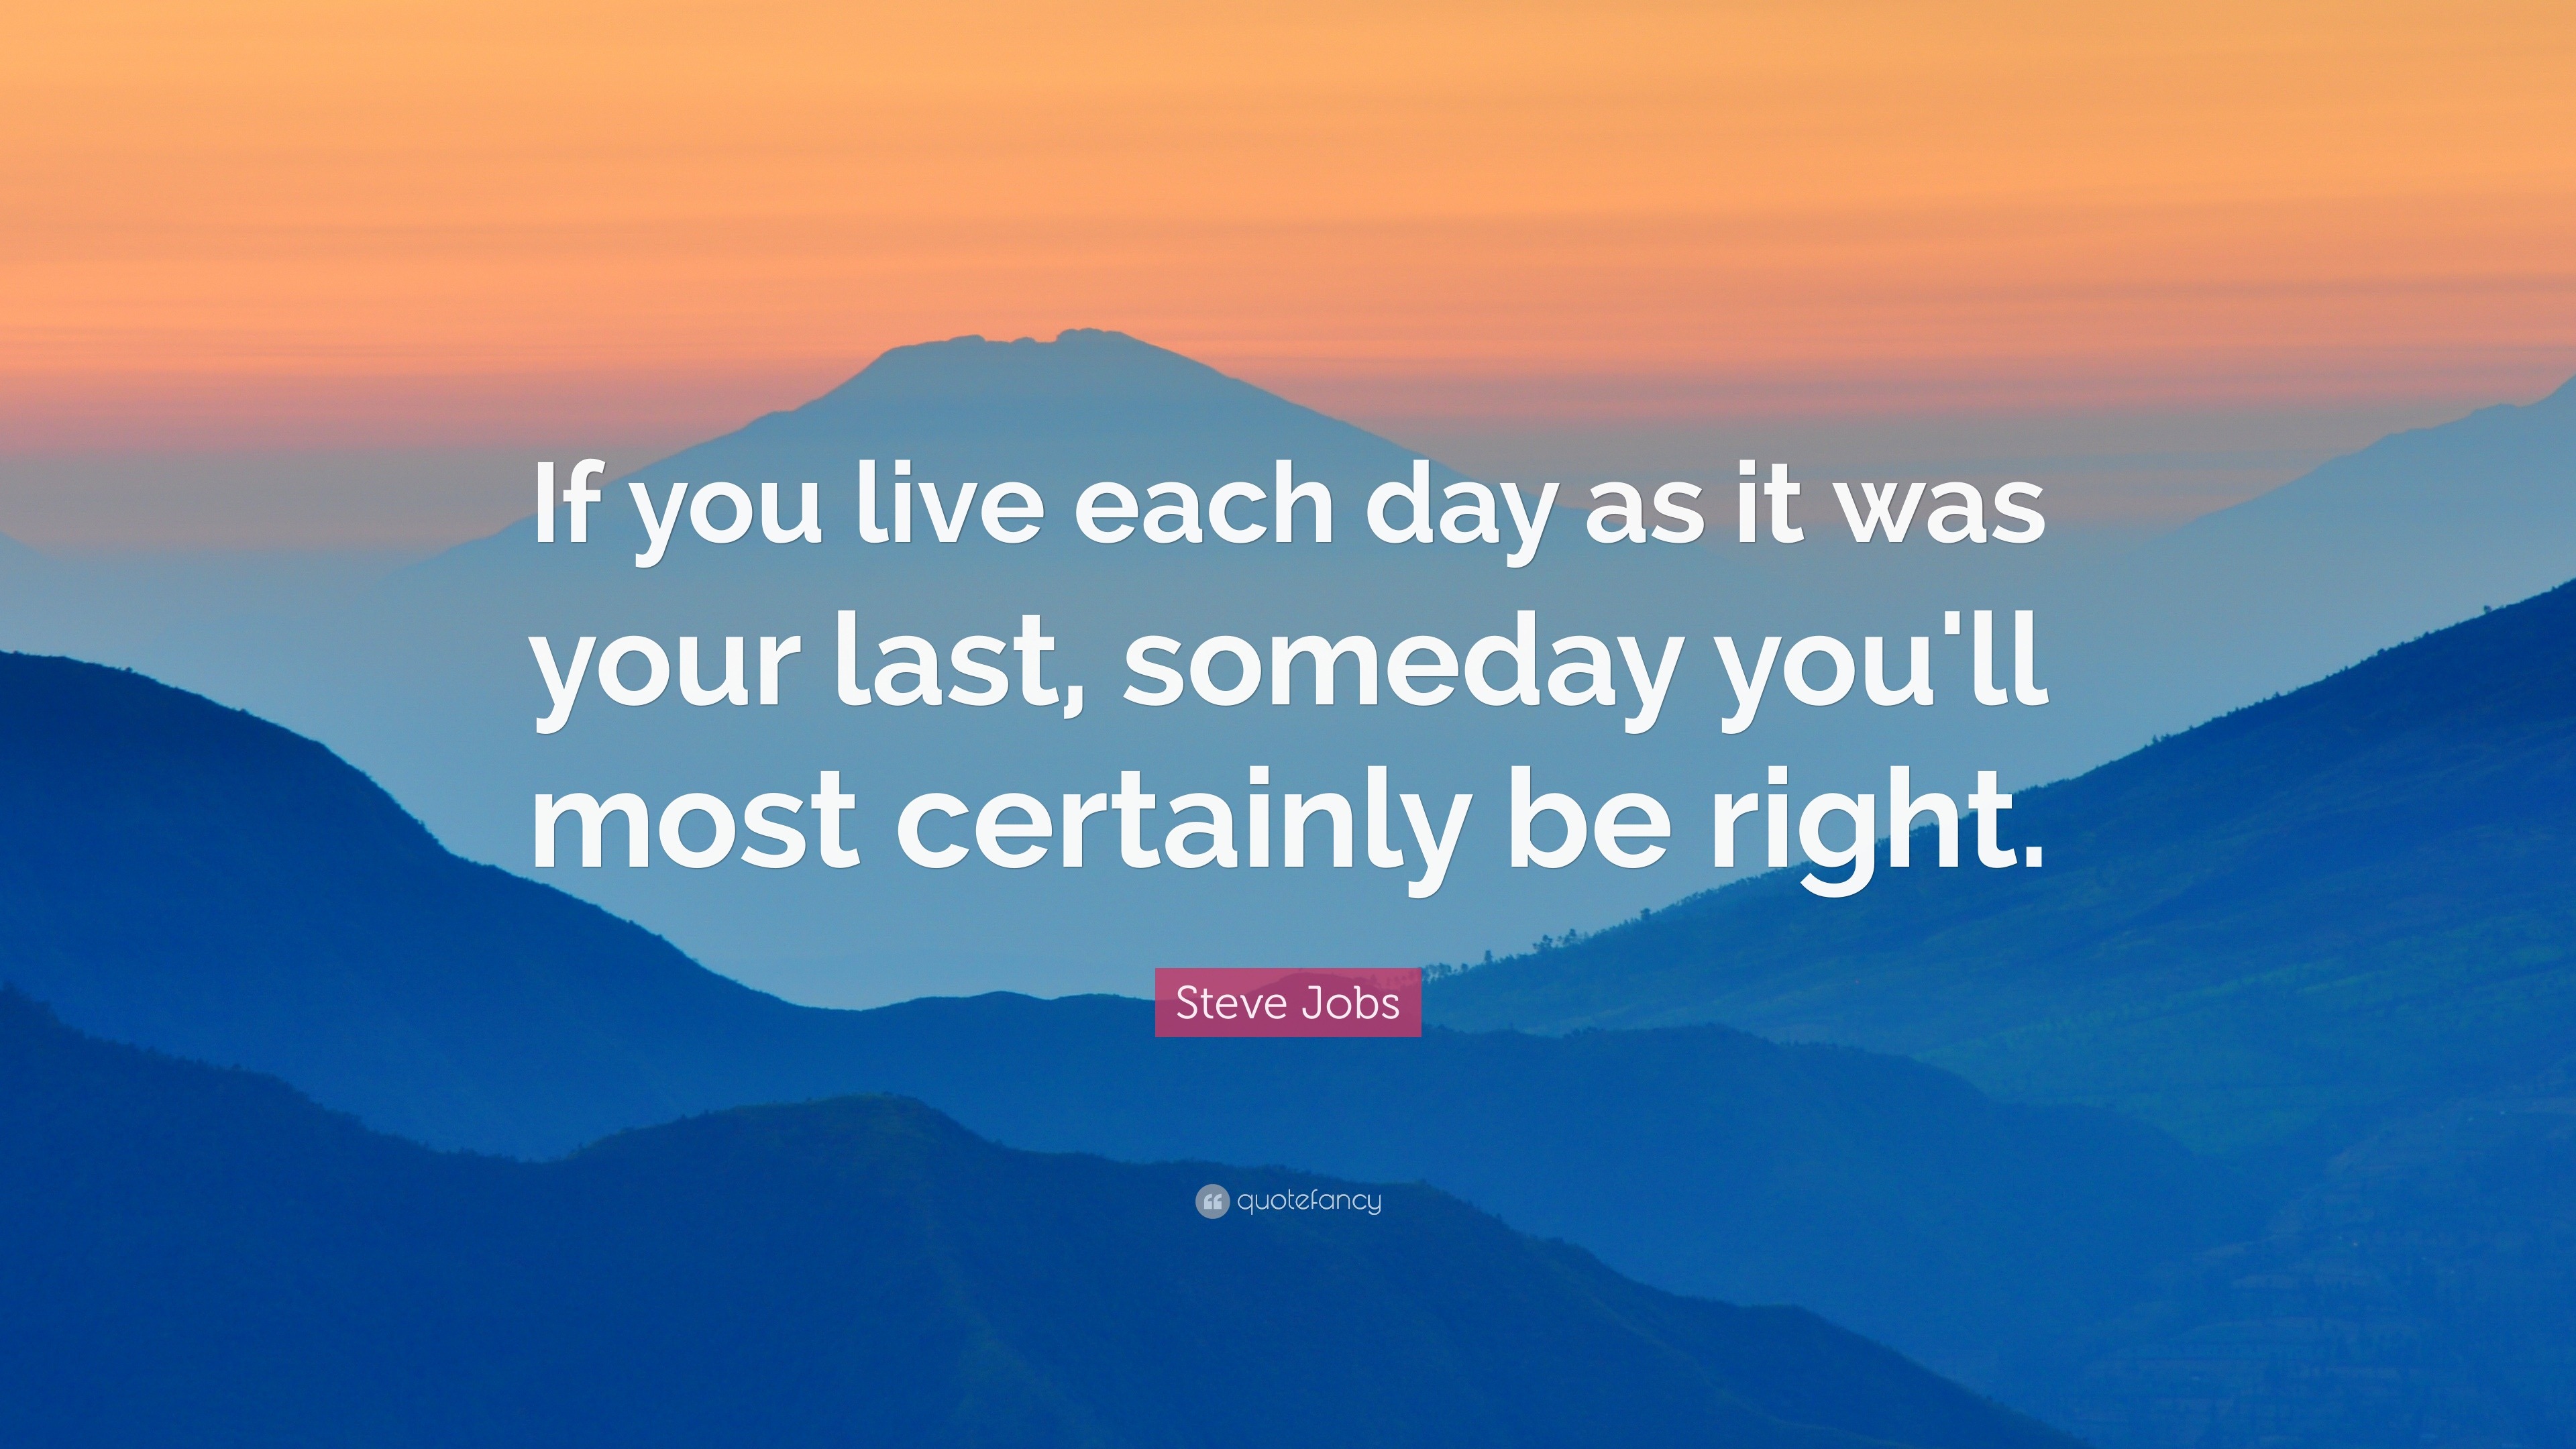 Steve Jobs Quote: “If you live each day as it was your last, someday ...